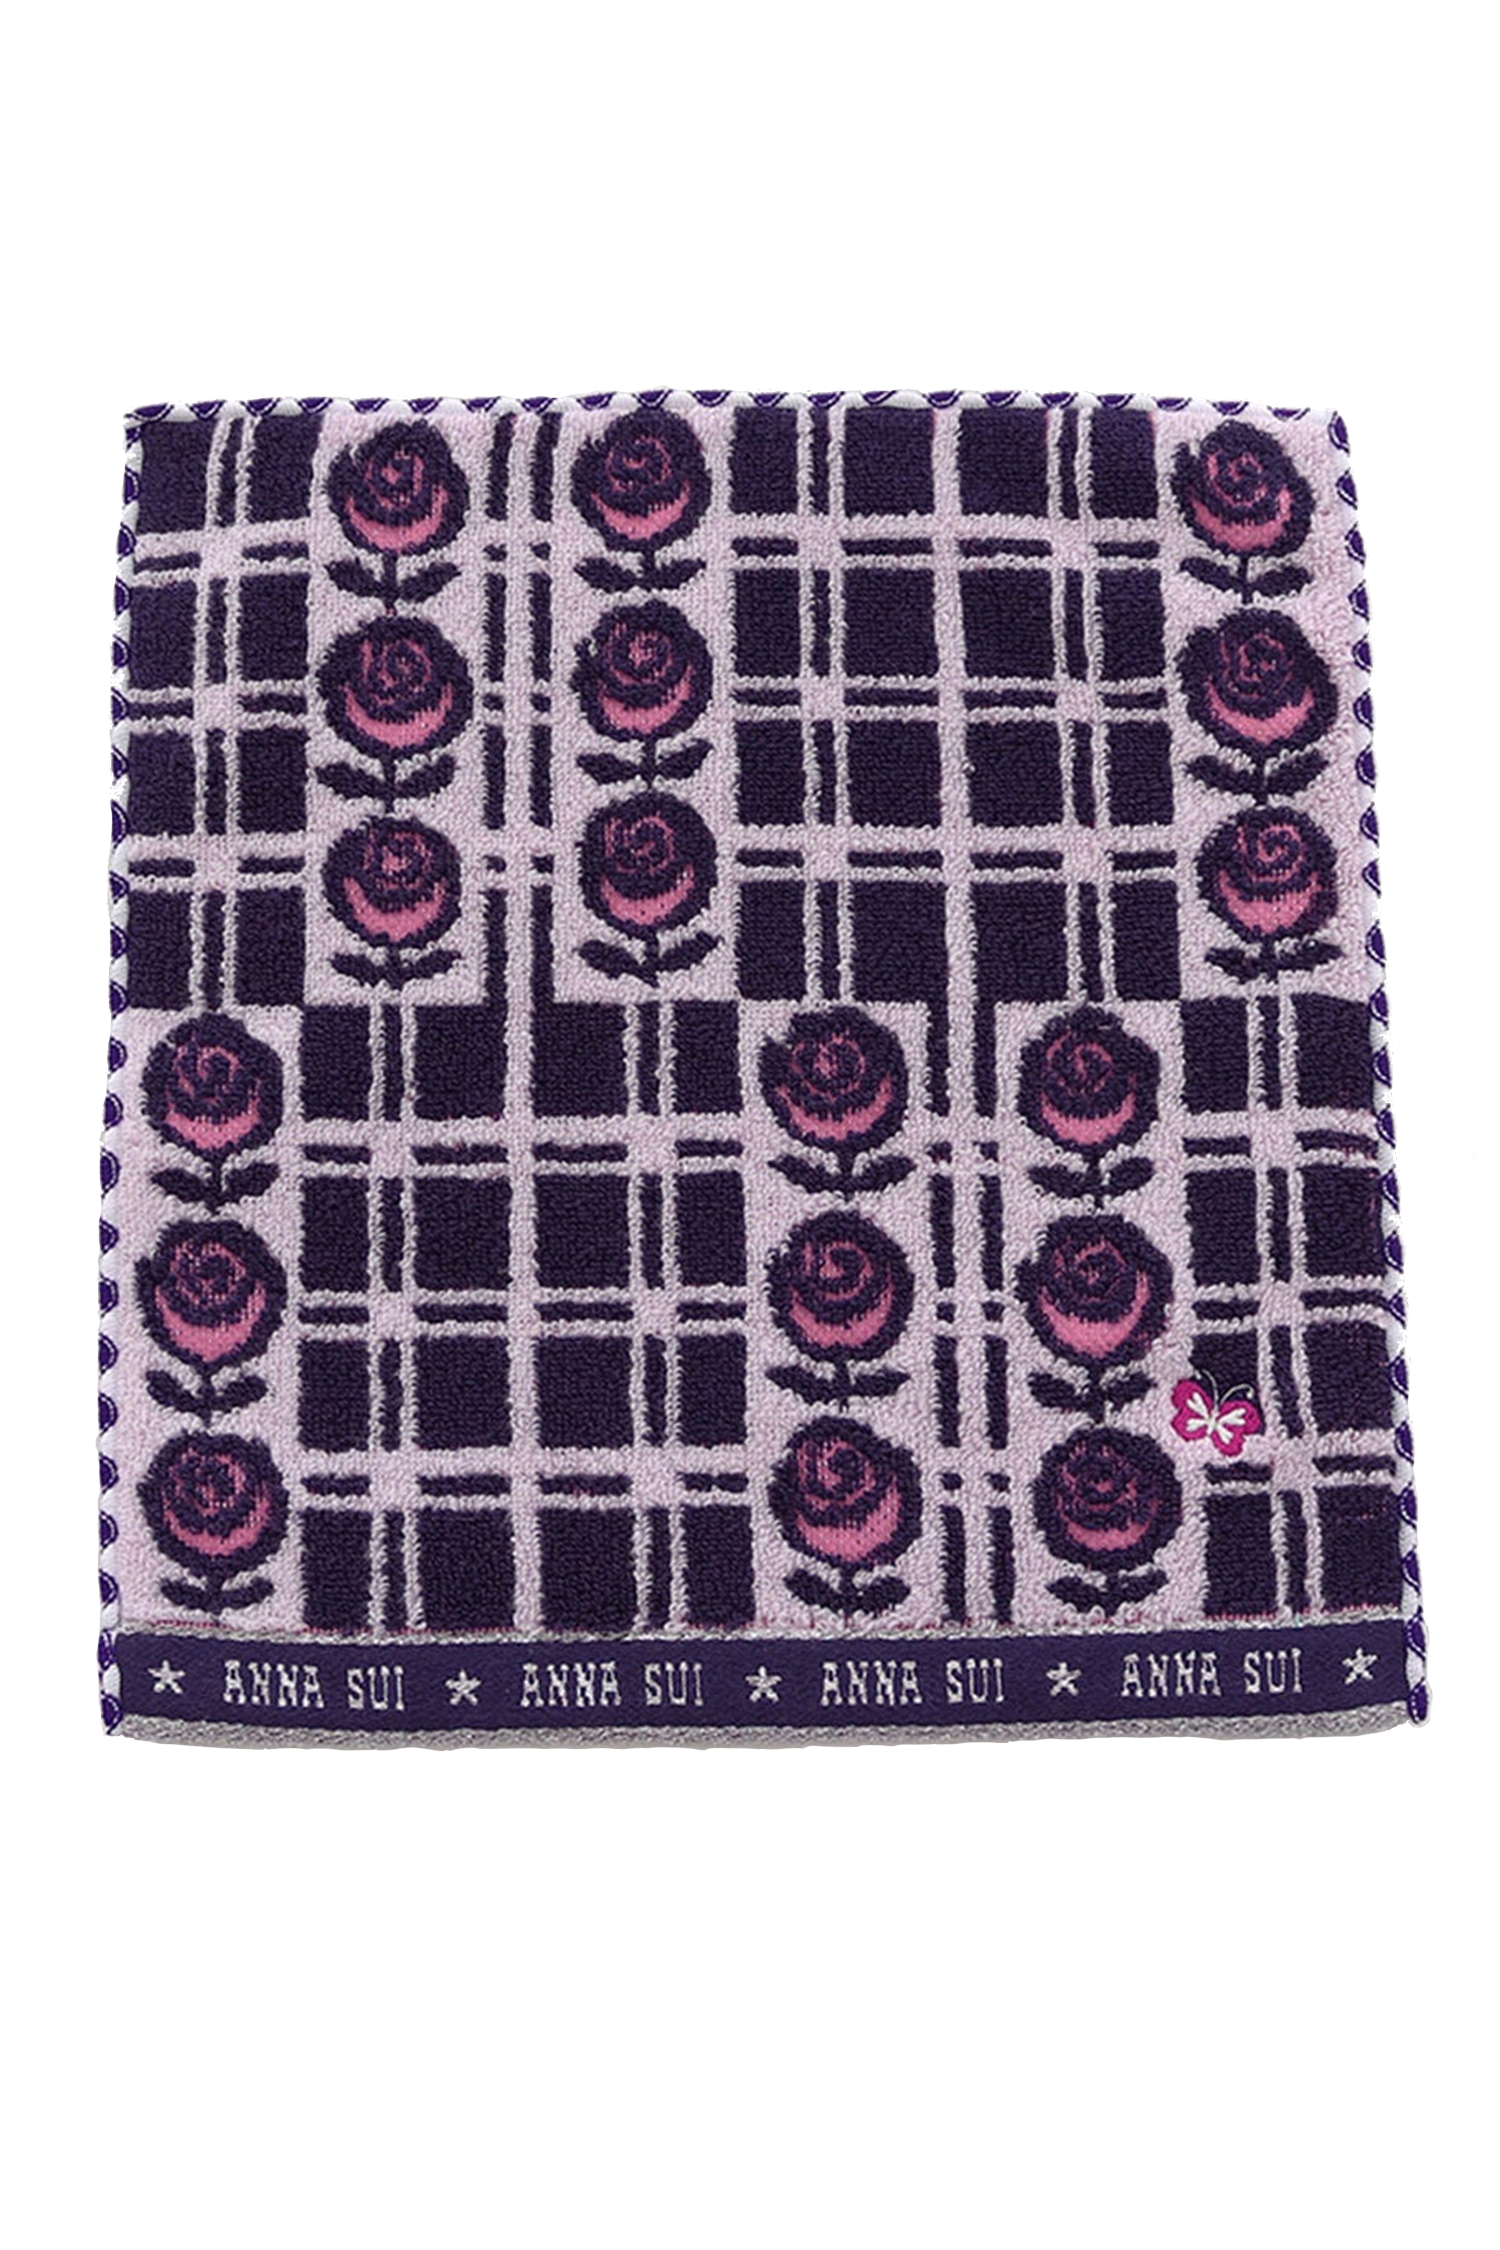 Washcloth, black with pink roses on white, black border at bottom with white Anna Sui's signature